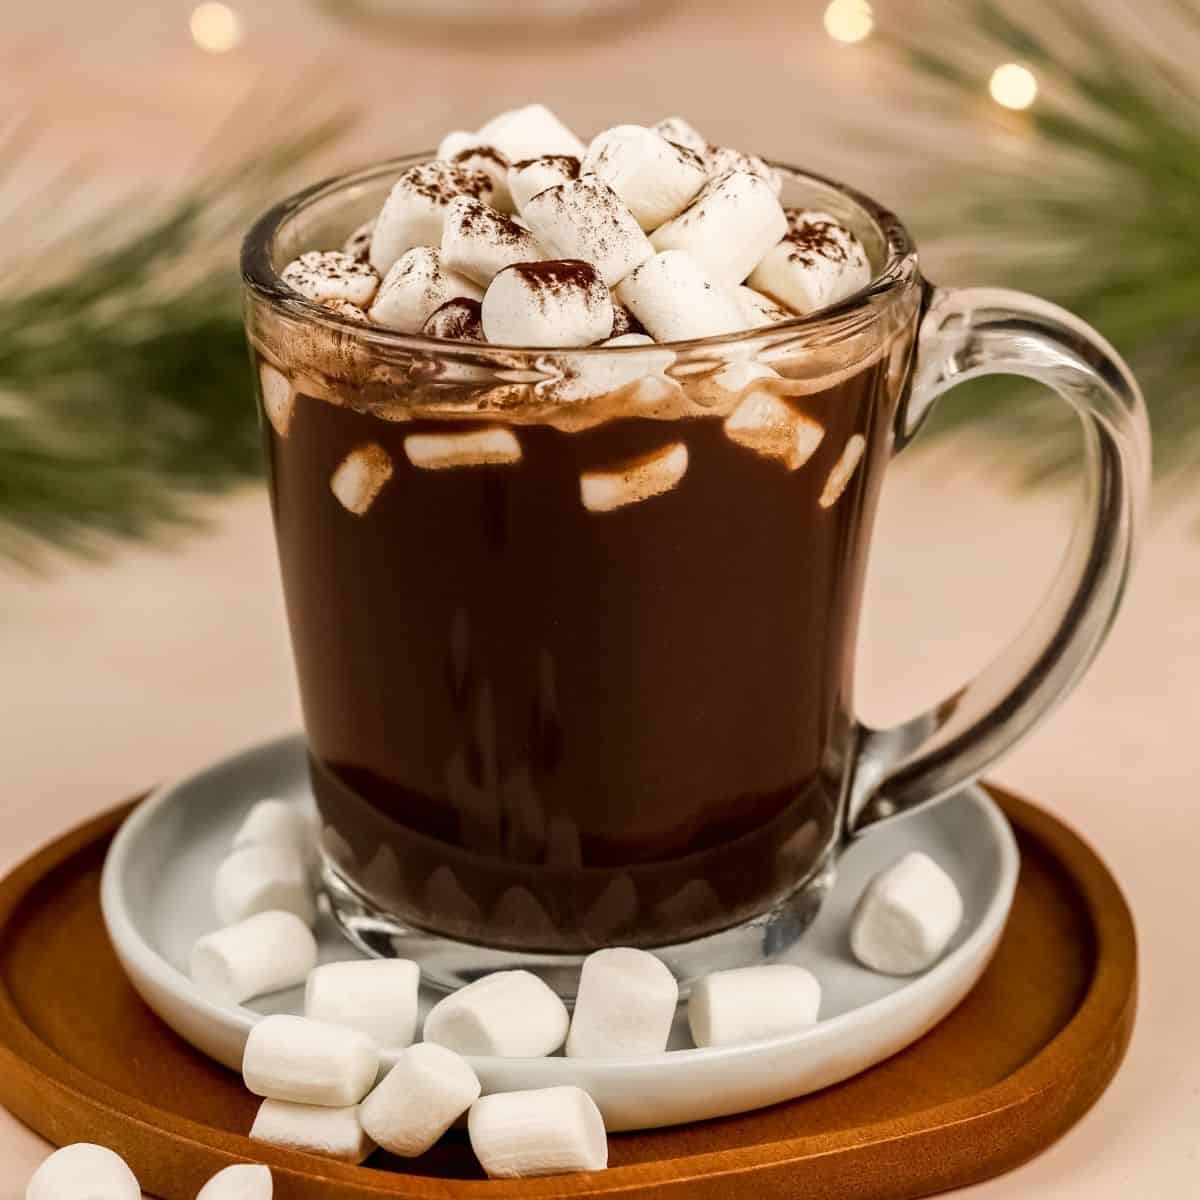 dairy free hot chocolate in a glass mug with many marshmallows on top